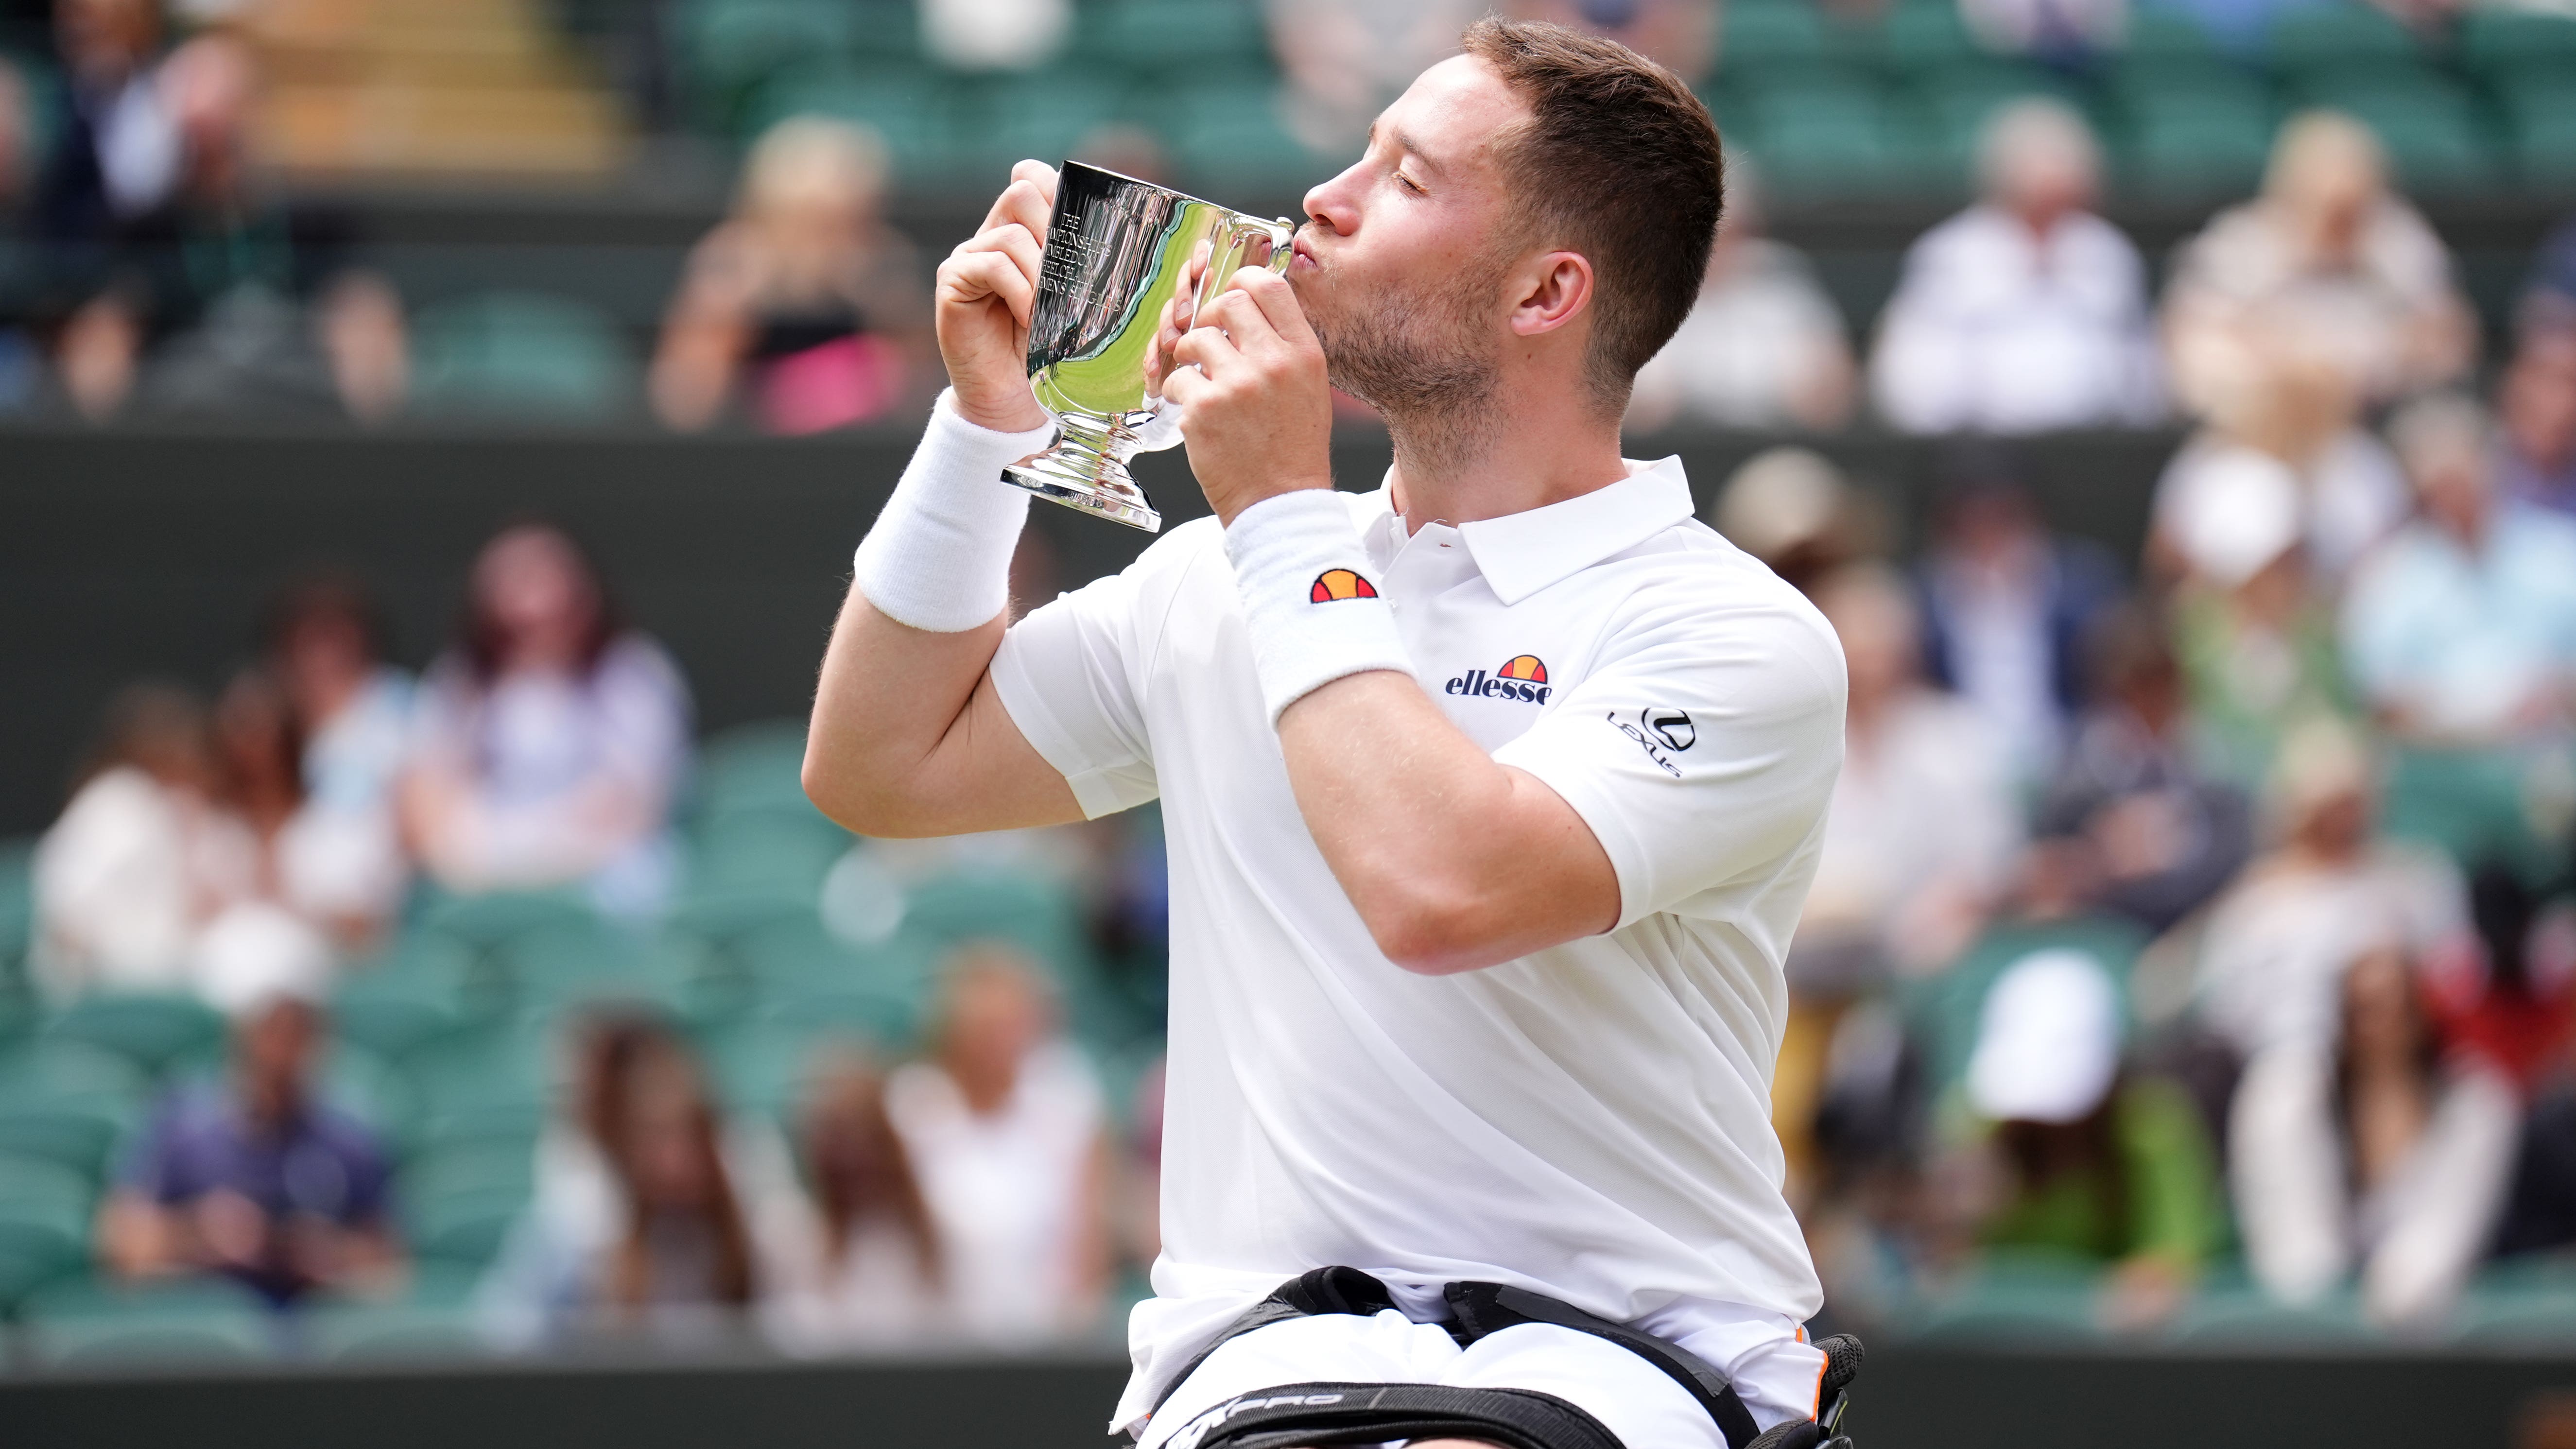 Alfie Hewett completes career Grand Slam with emotional Wimbledon victory